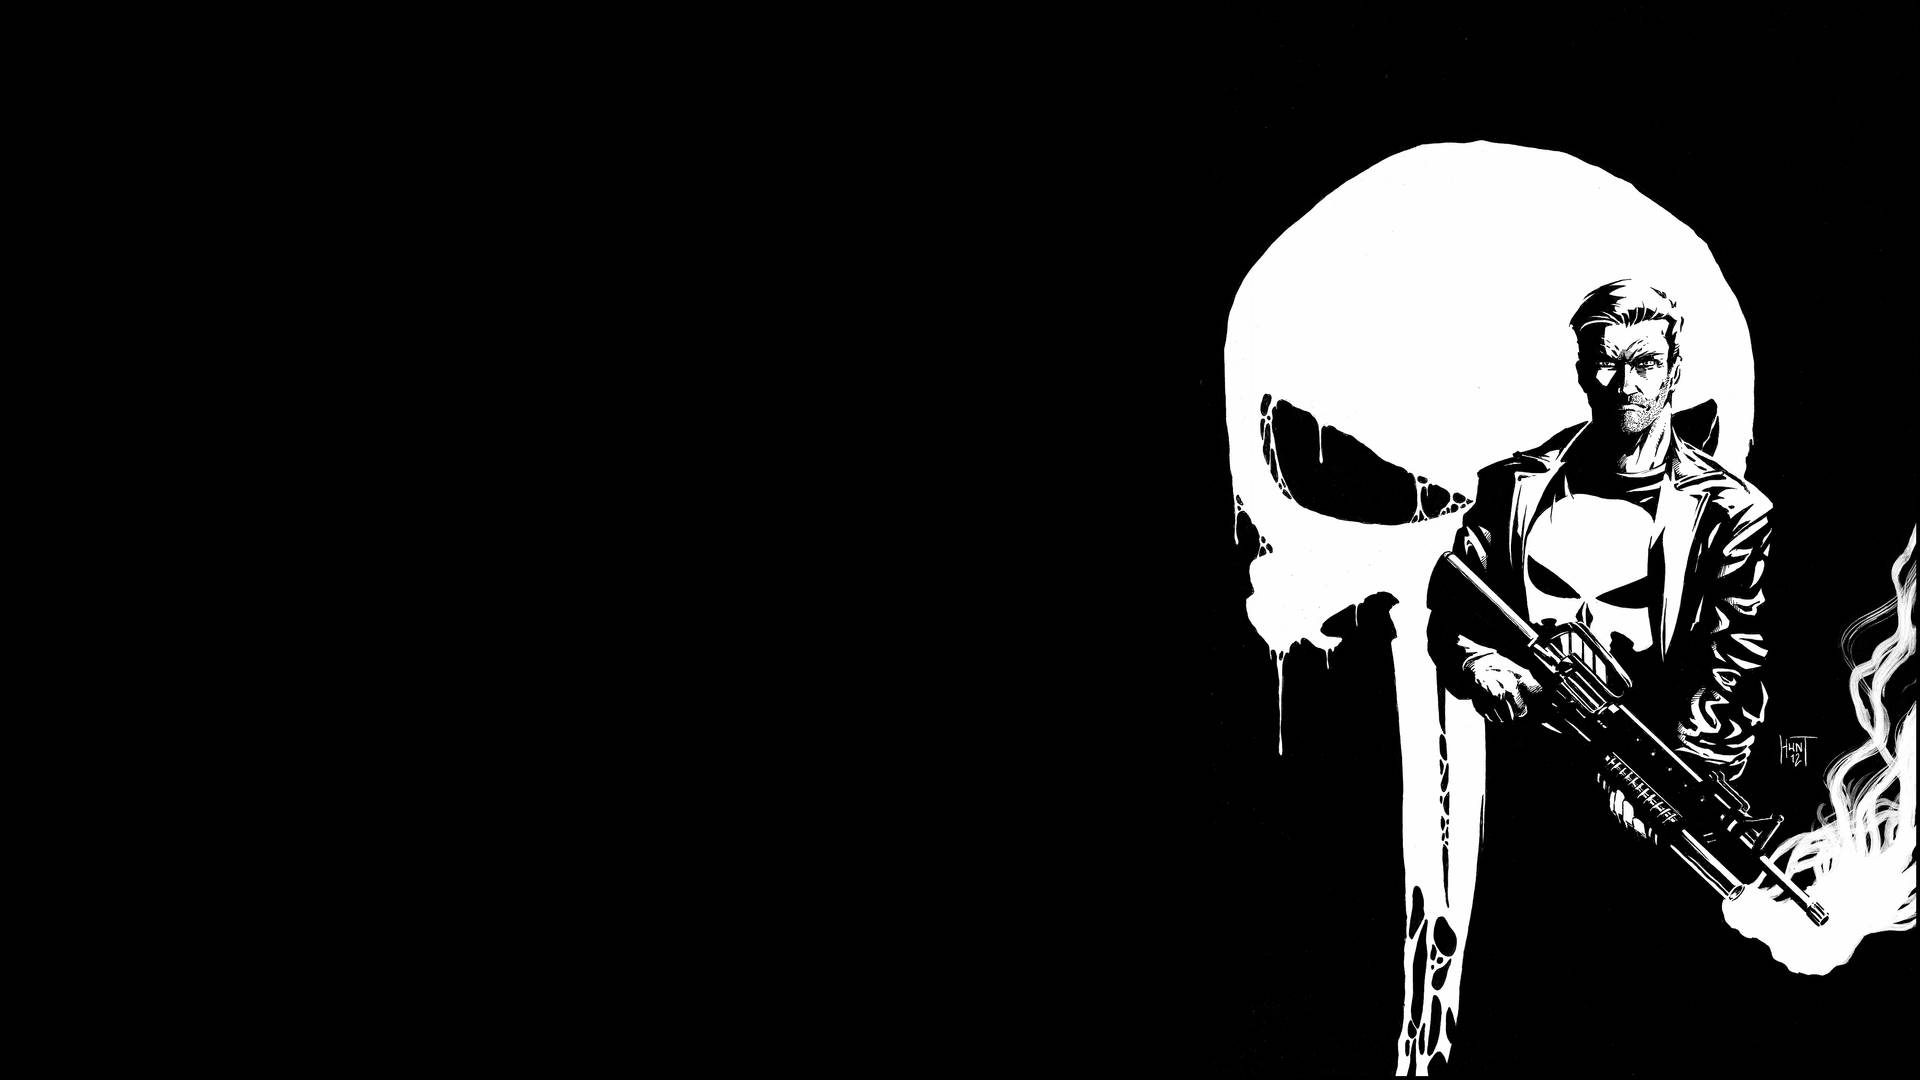 An Intense, Ruthless Punisher Logo In High Resolution, Showcasing The Iconic Skull In Menacing Detail Background